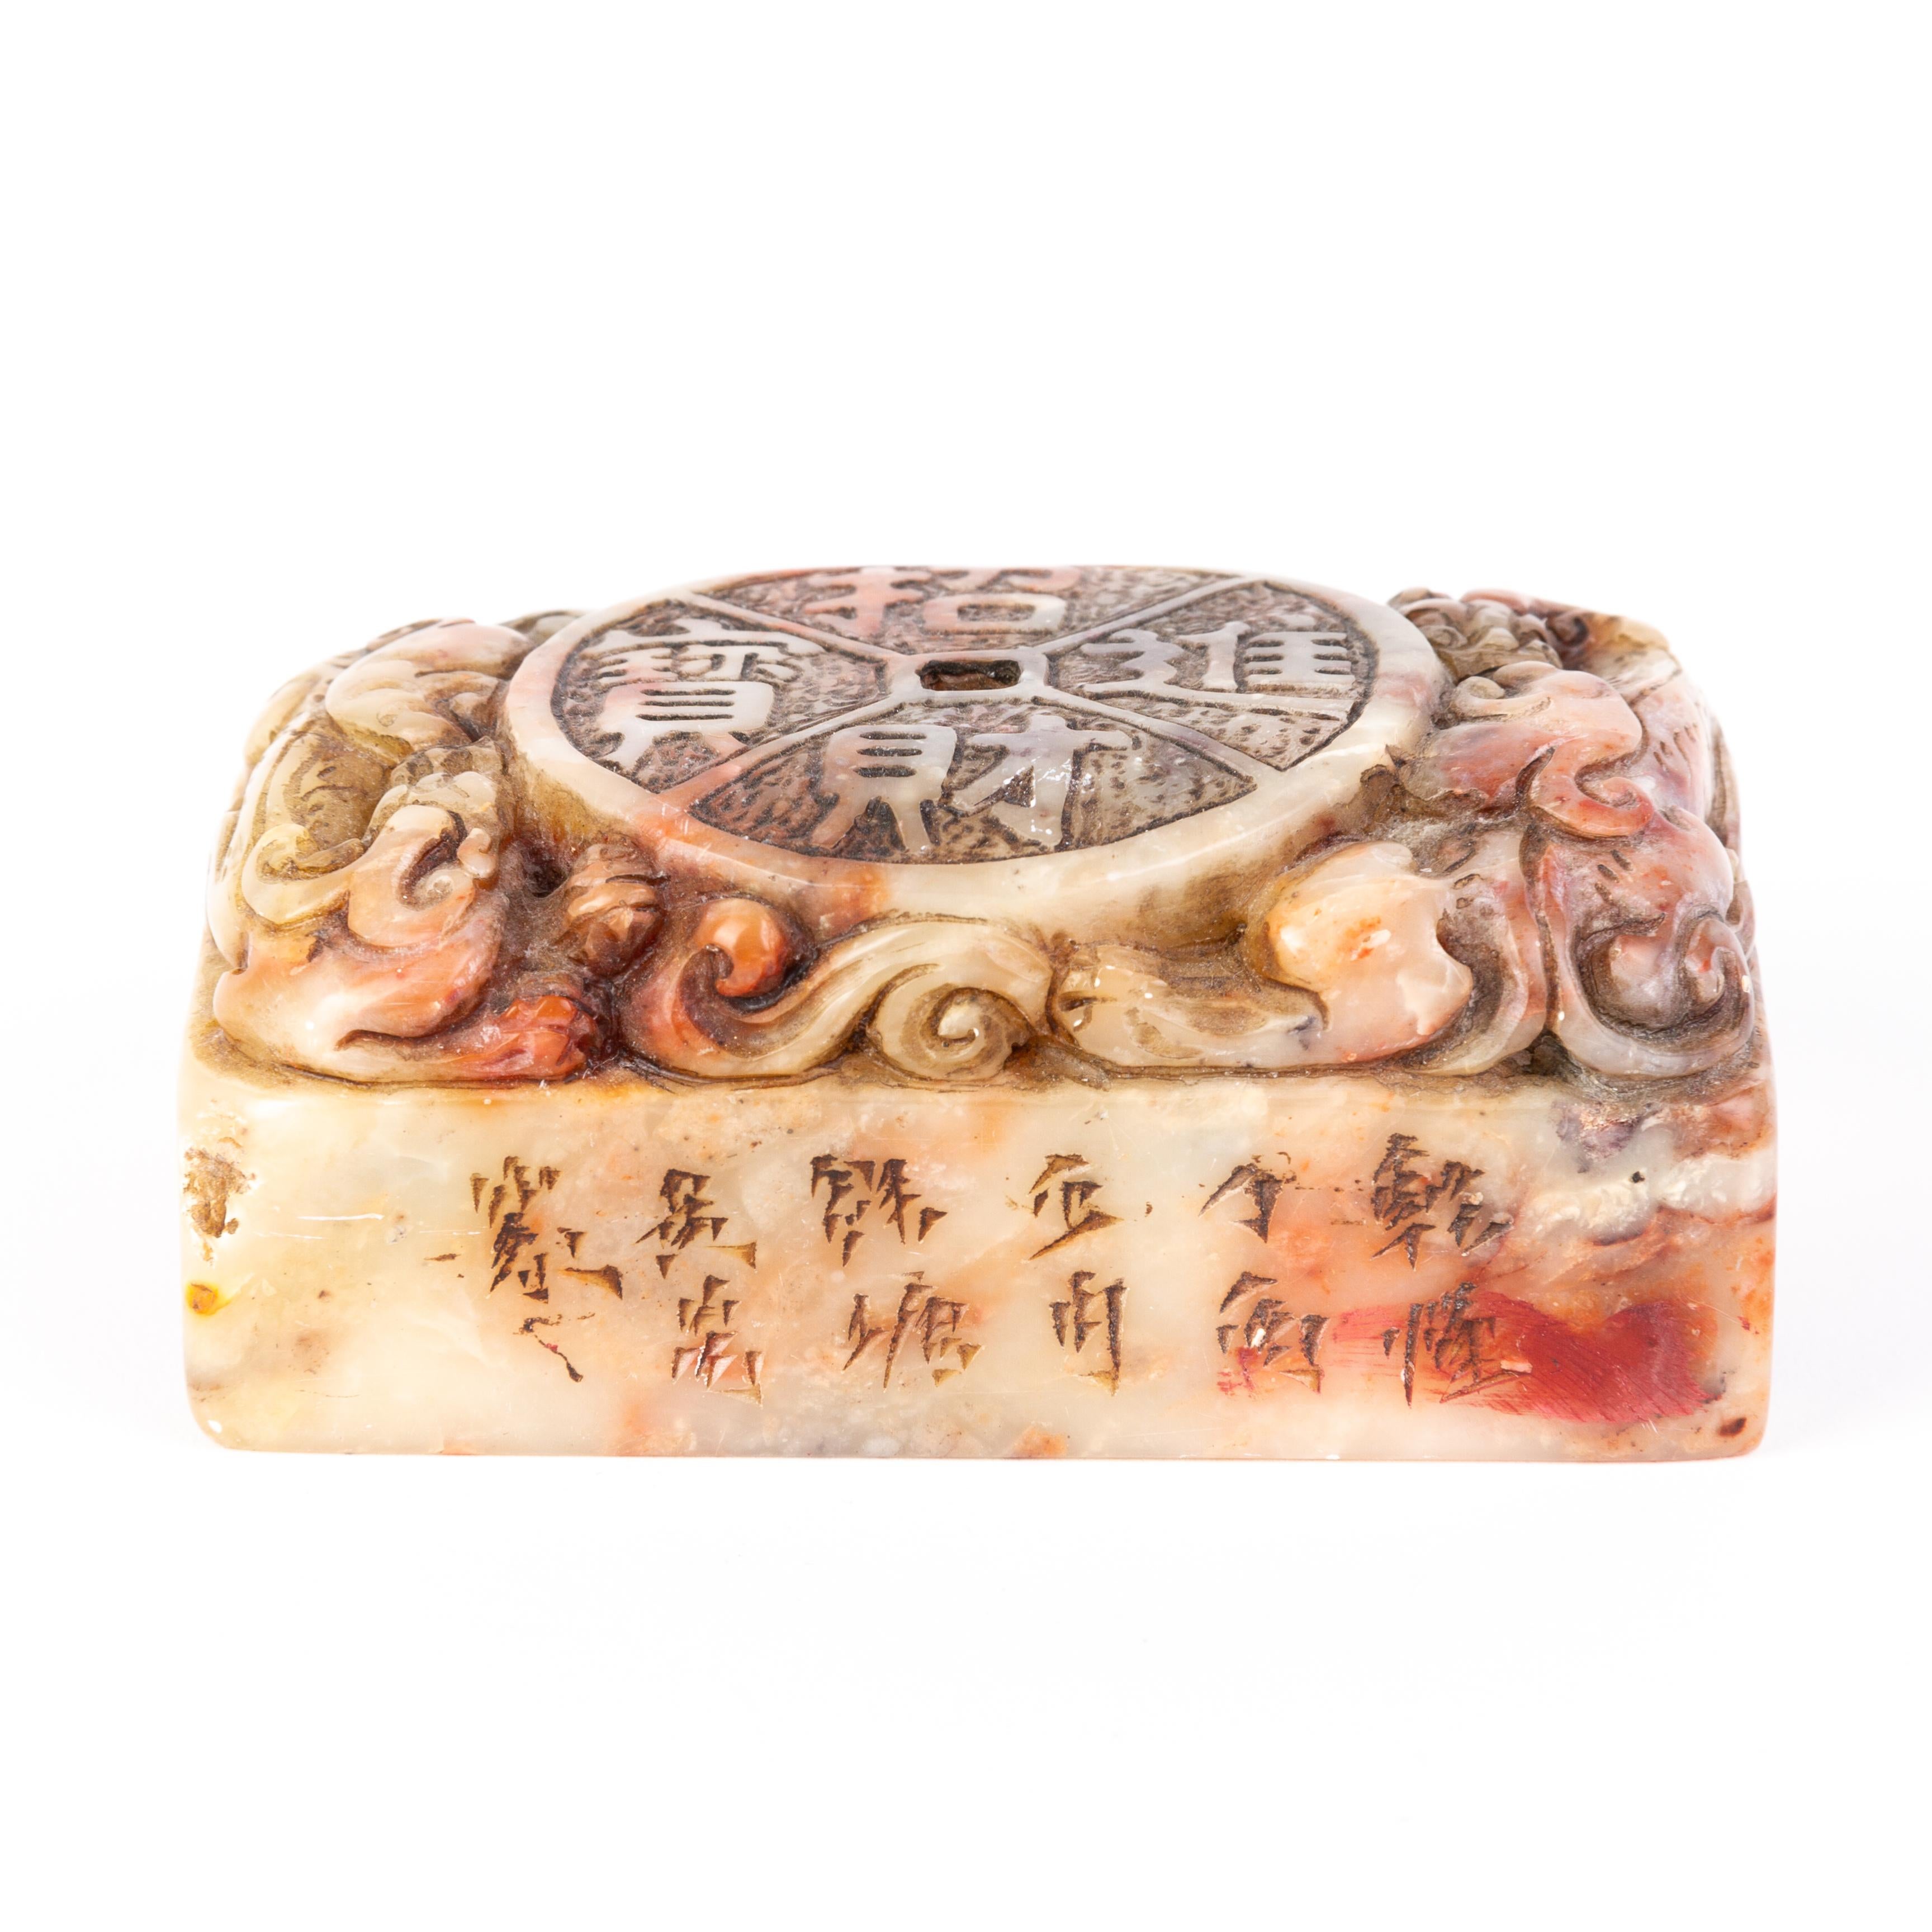 A finely carved Chinese soapstone seal sculpture.
1820 to 1880 China, Qing Dynasty.
Very good condition.
From a private collection.
Free international shipping.